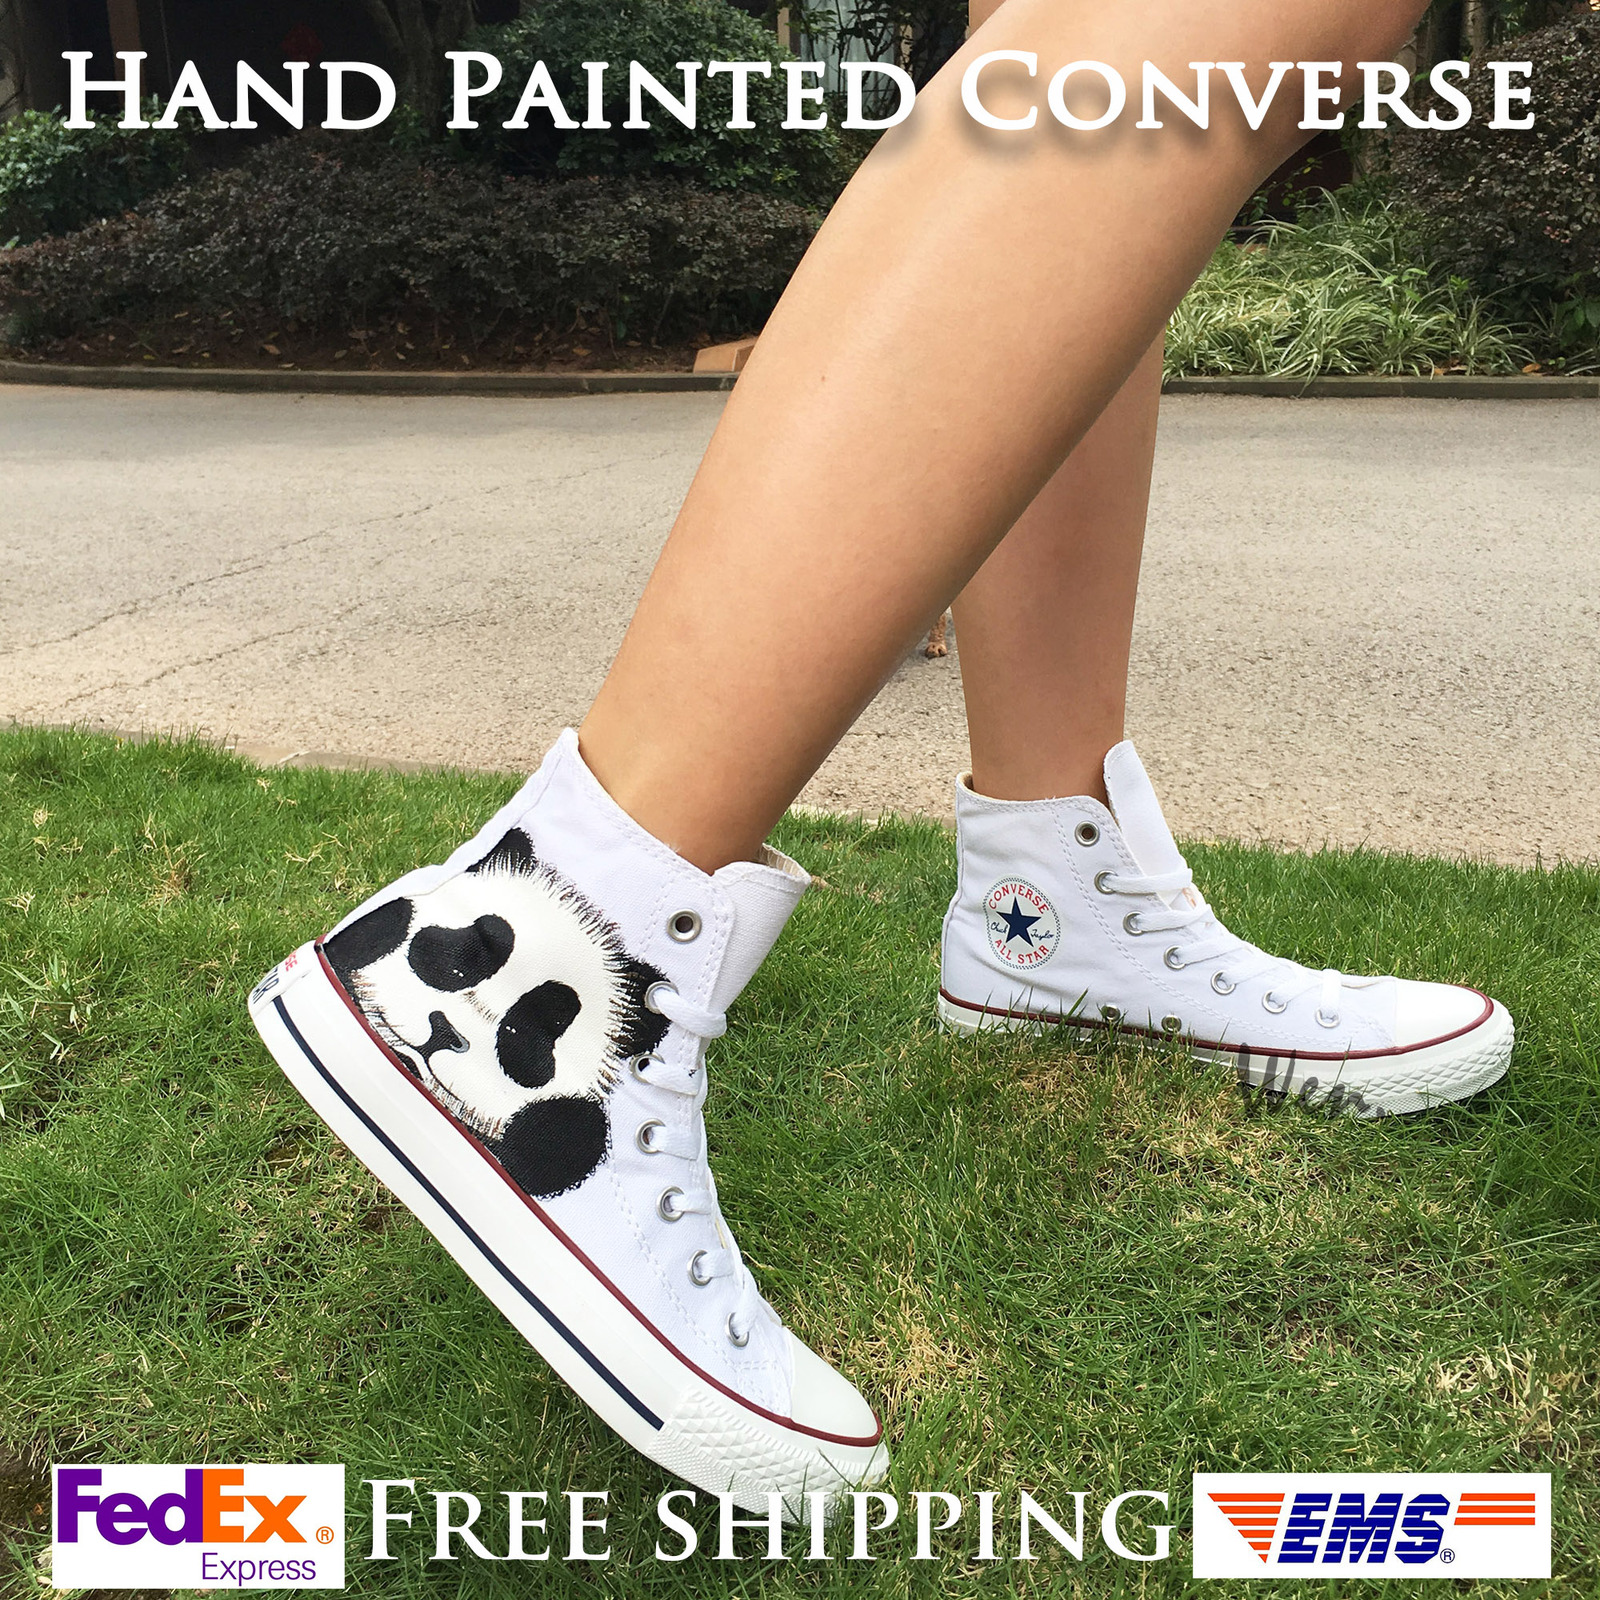 Cute Panda Converse All Star Hand Painted Shoes High Top White Canvas Sneakers